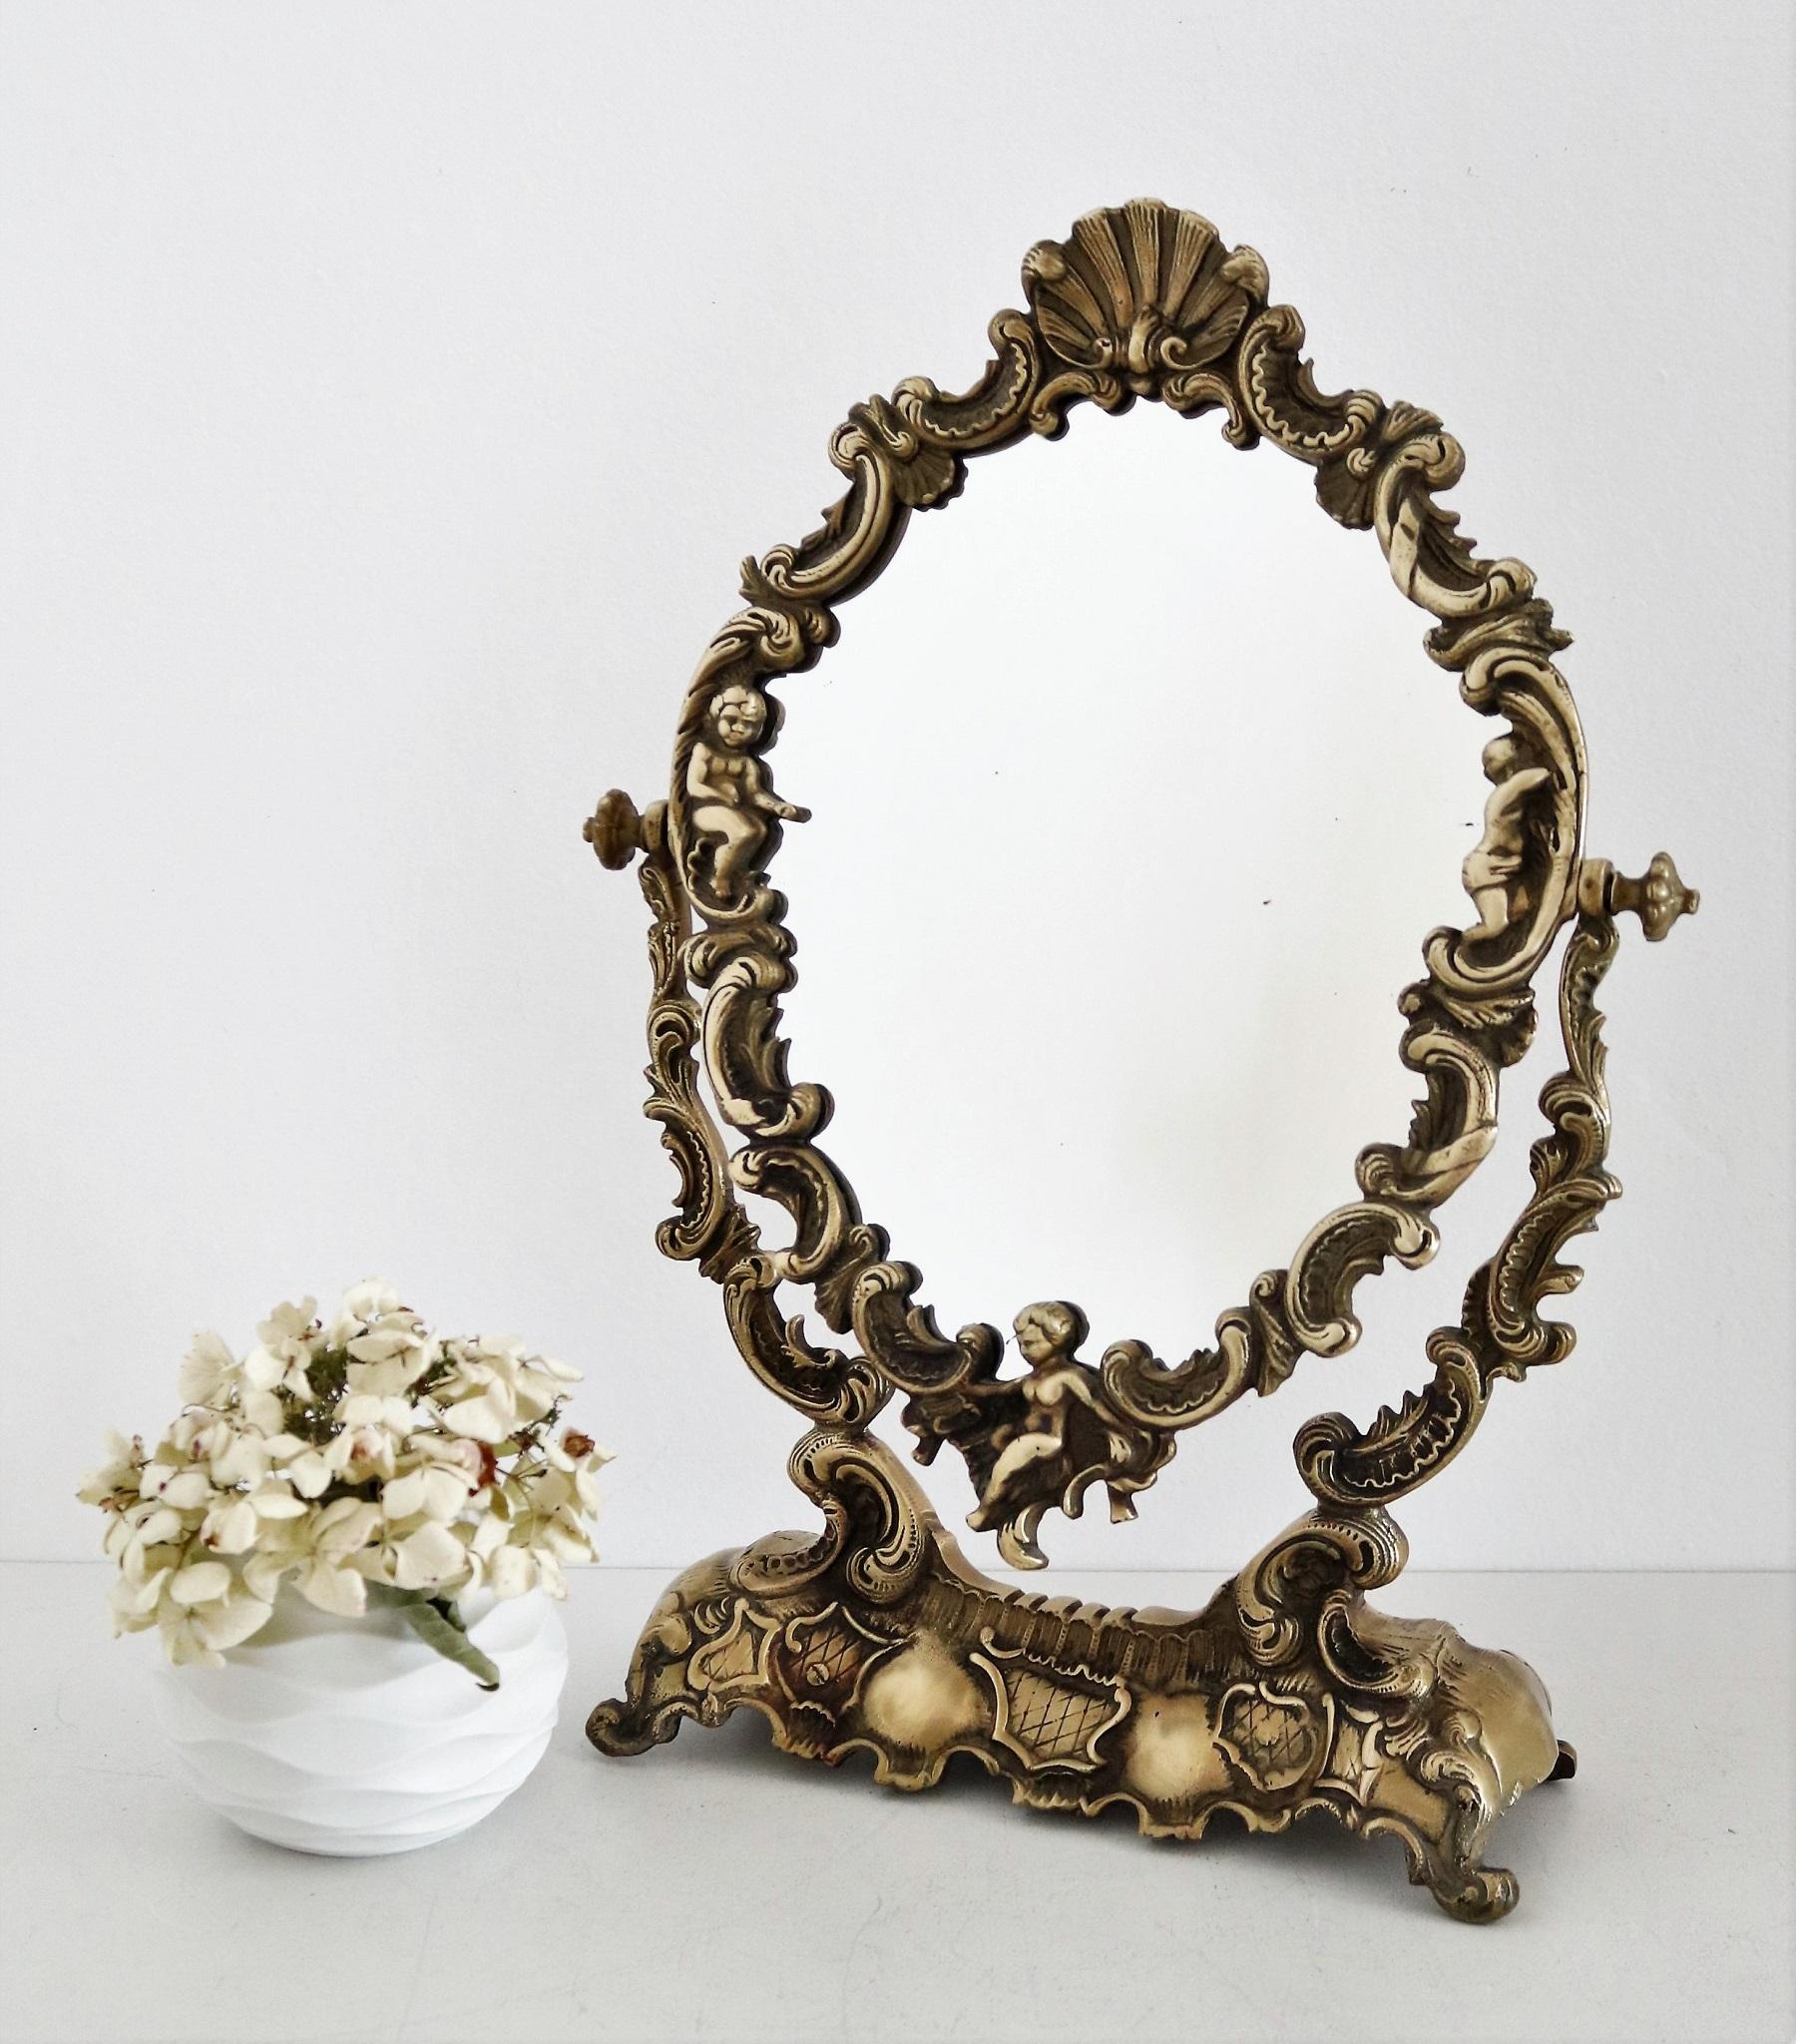 Italian Midcentury Vanity Dressing Table Mirror in Bronze with Angels, 1970s For Sale 10